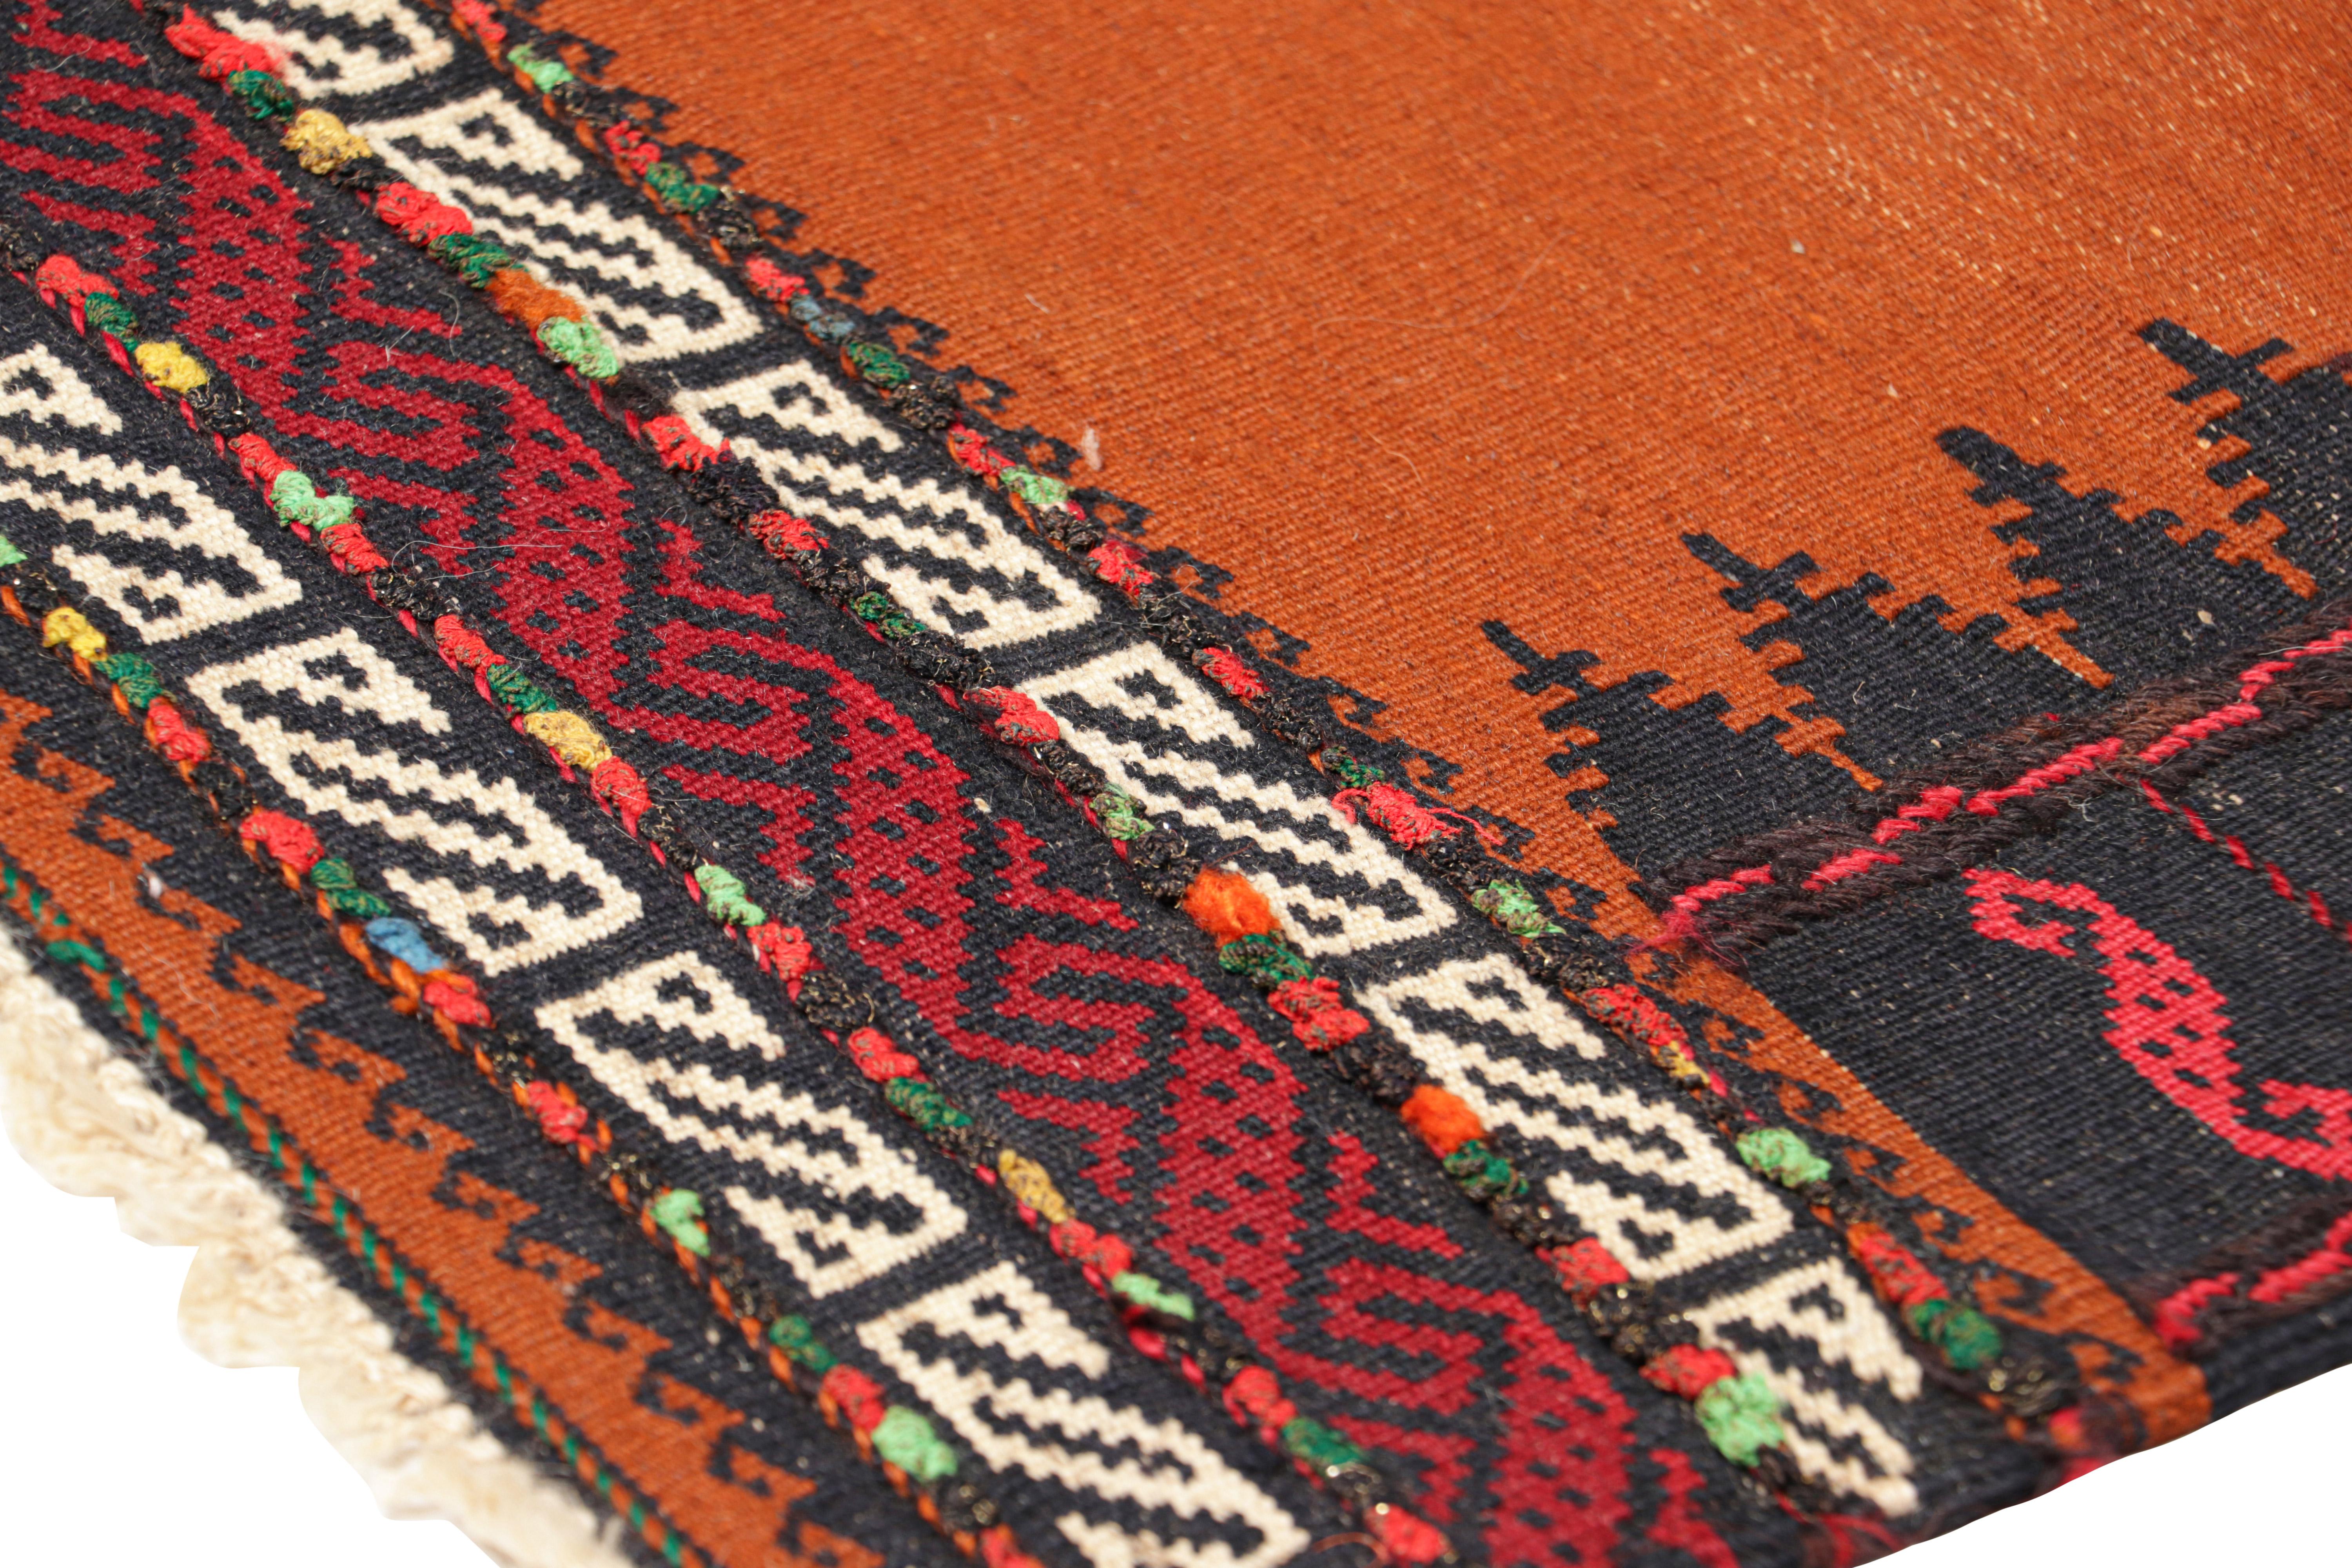 Tribal Vintage Afghan Kilim in Rust with Geometric Patterns, from Rug & Kilim For Sale